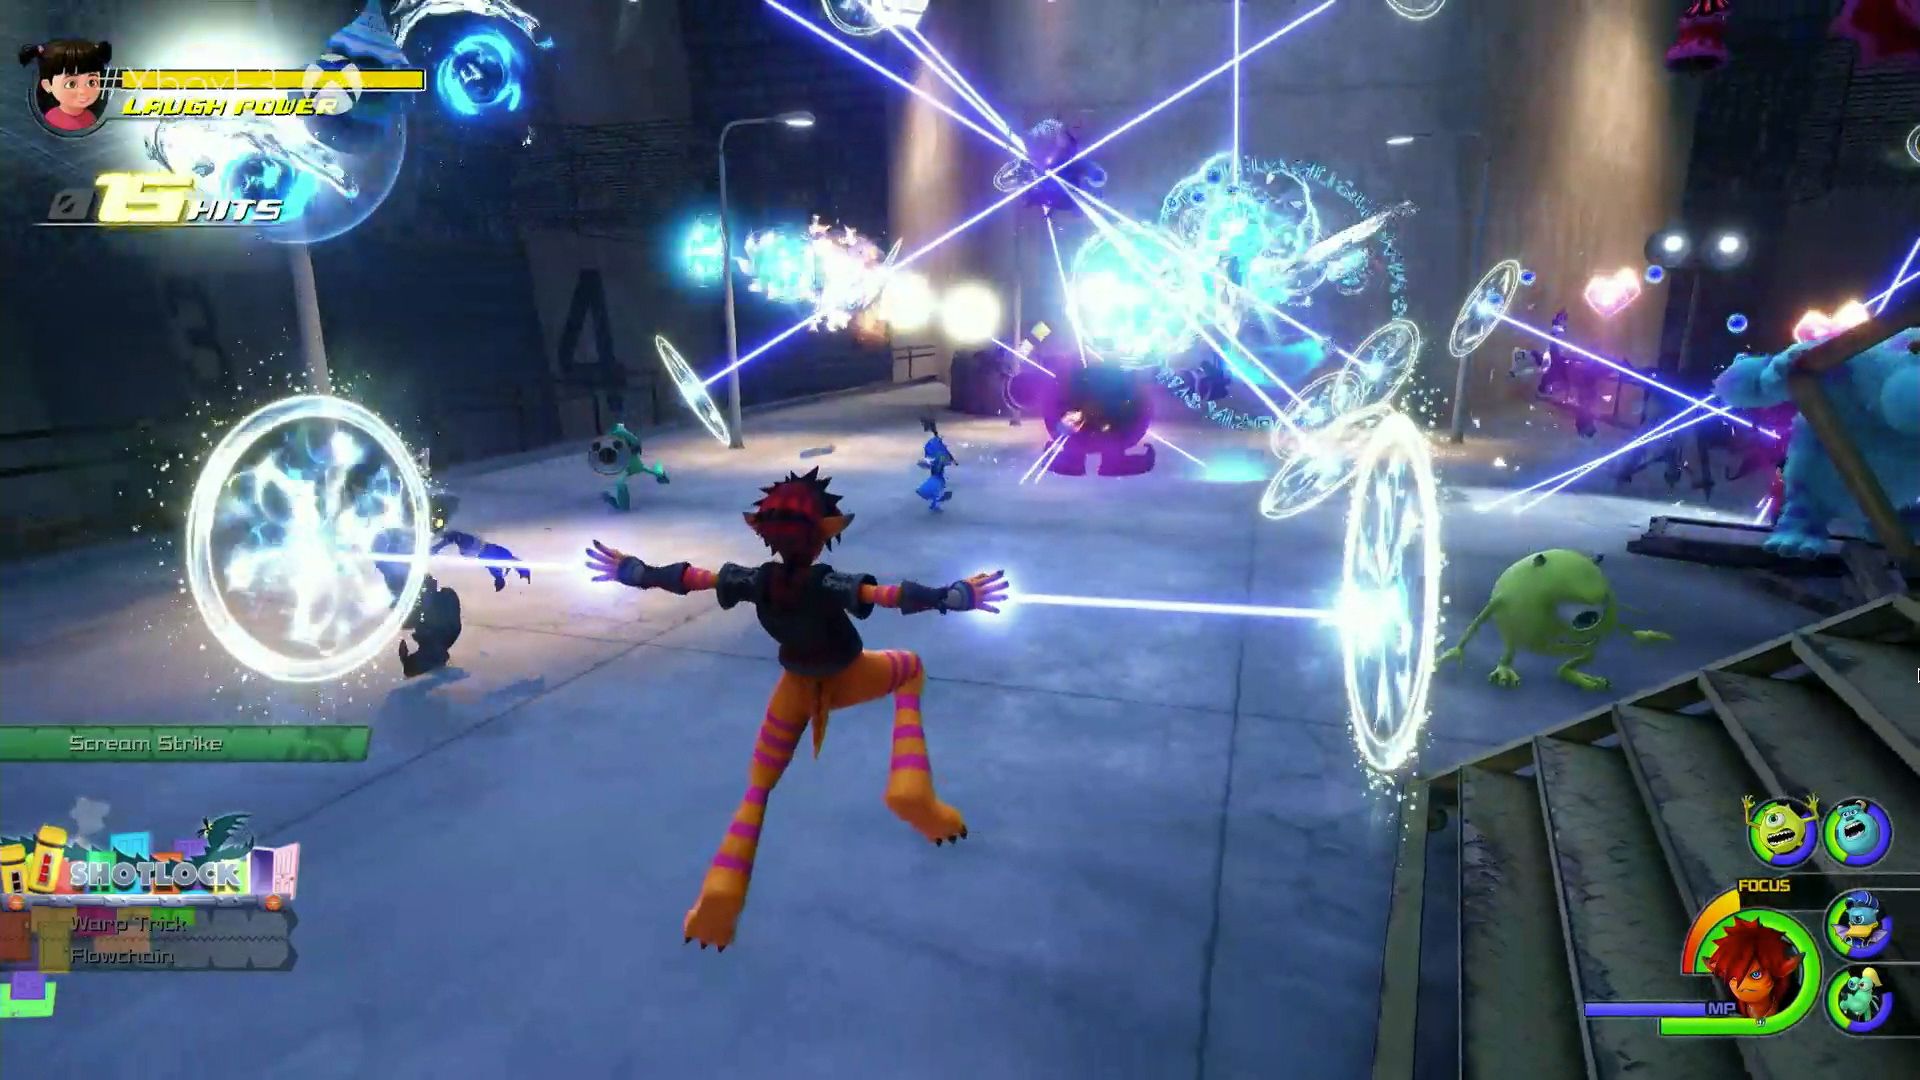 Sora battling Heartless with Mike and Sully